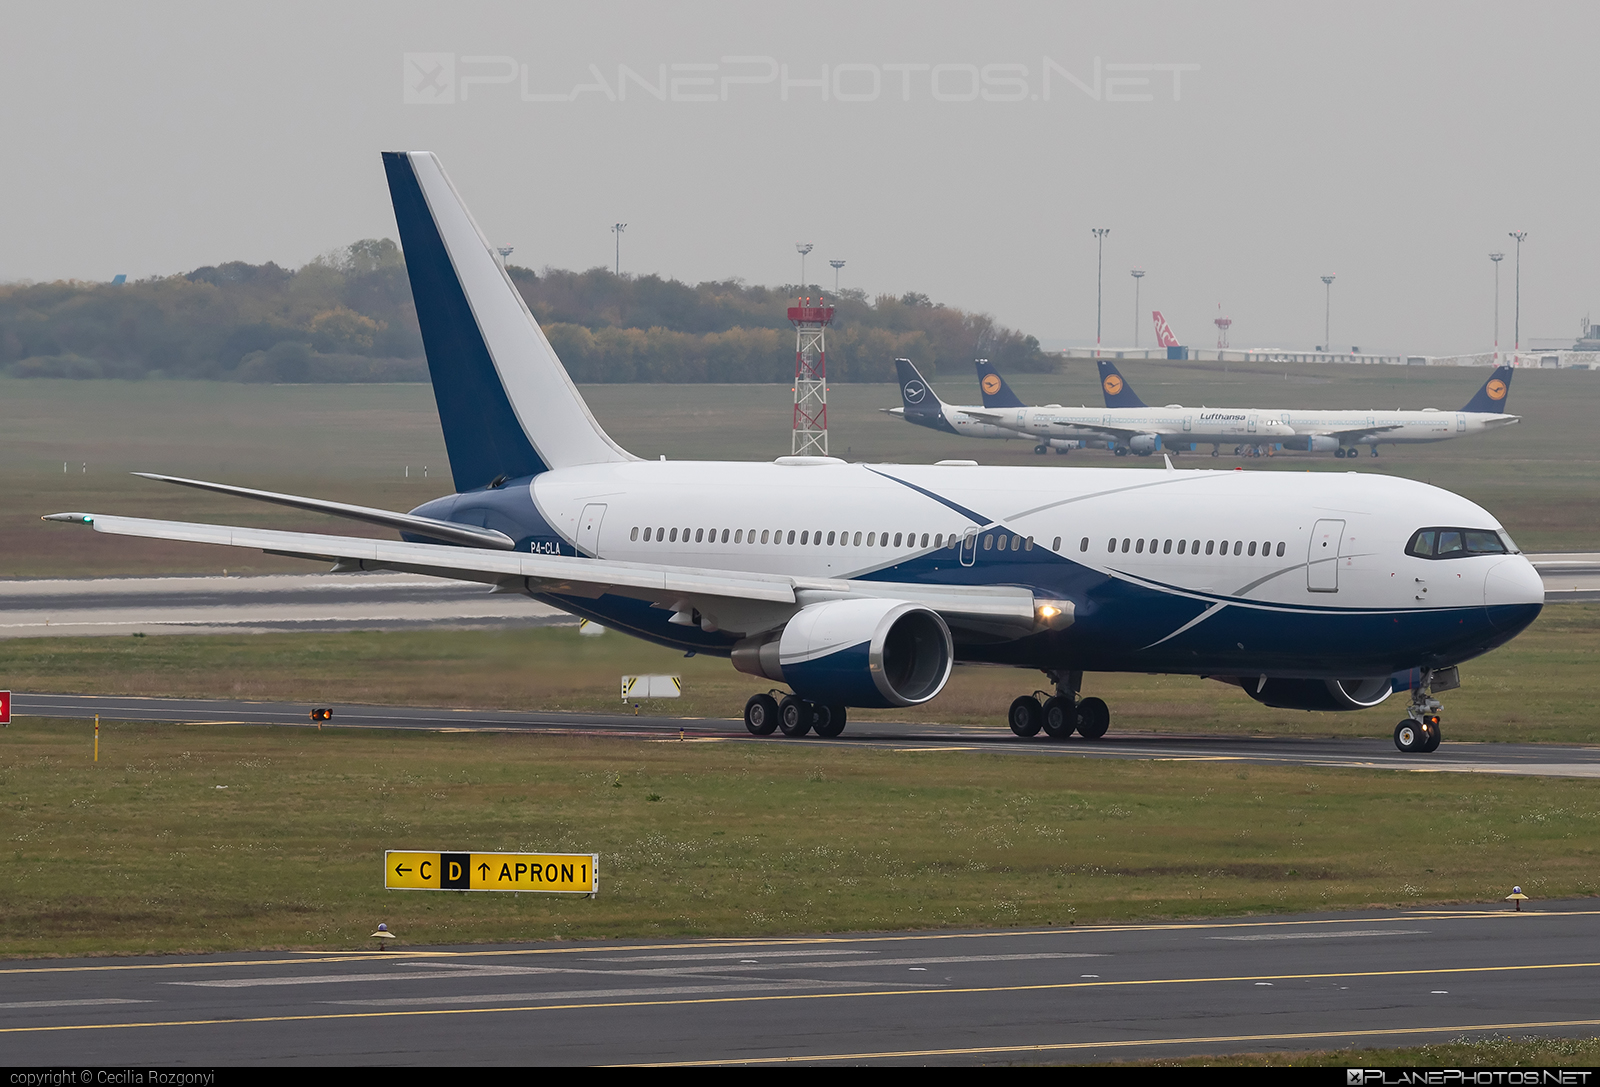 Boeing 767-200ER - P4-CLA operated by Comlux Aruba #ComluxAruba #ComluxAviation #b767 #b767er #boeing #boeing767 #comlux